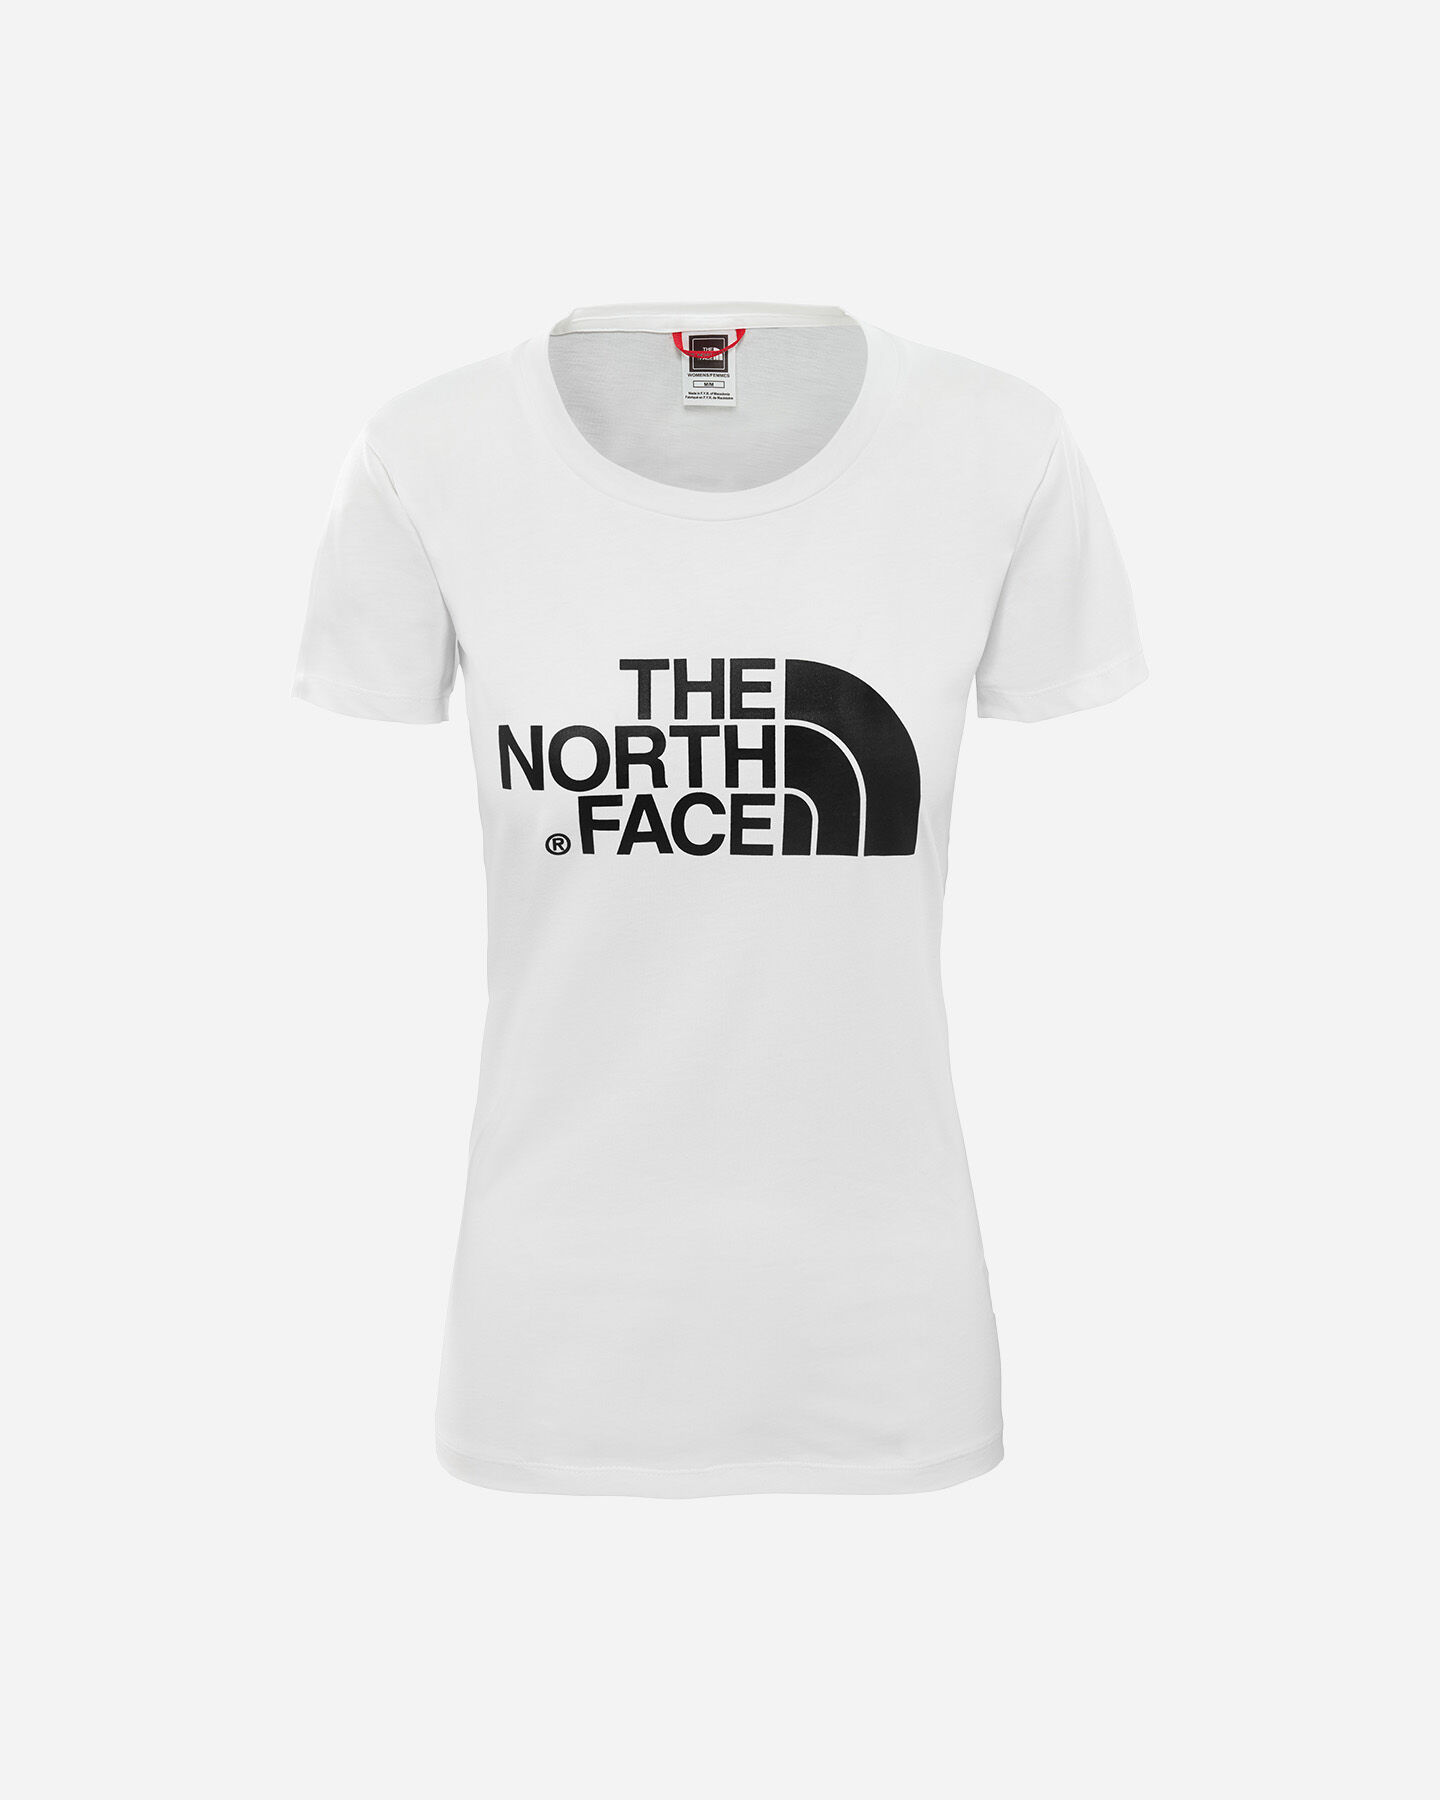  T-Shirt THE NORTH FACE EASY W S5015032|LG5|S scatto 0